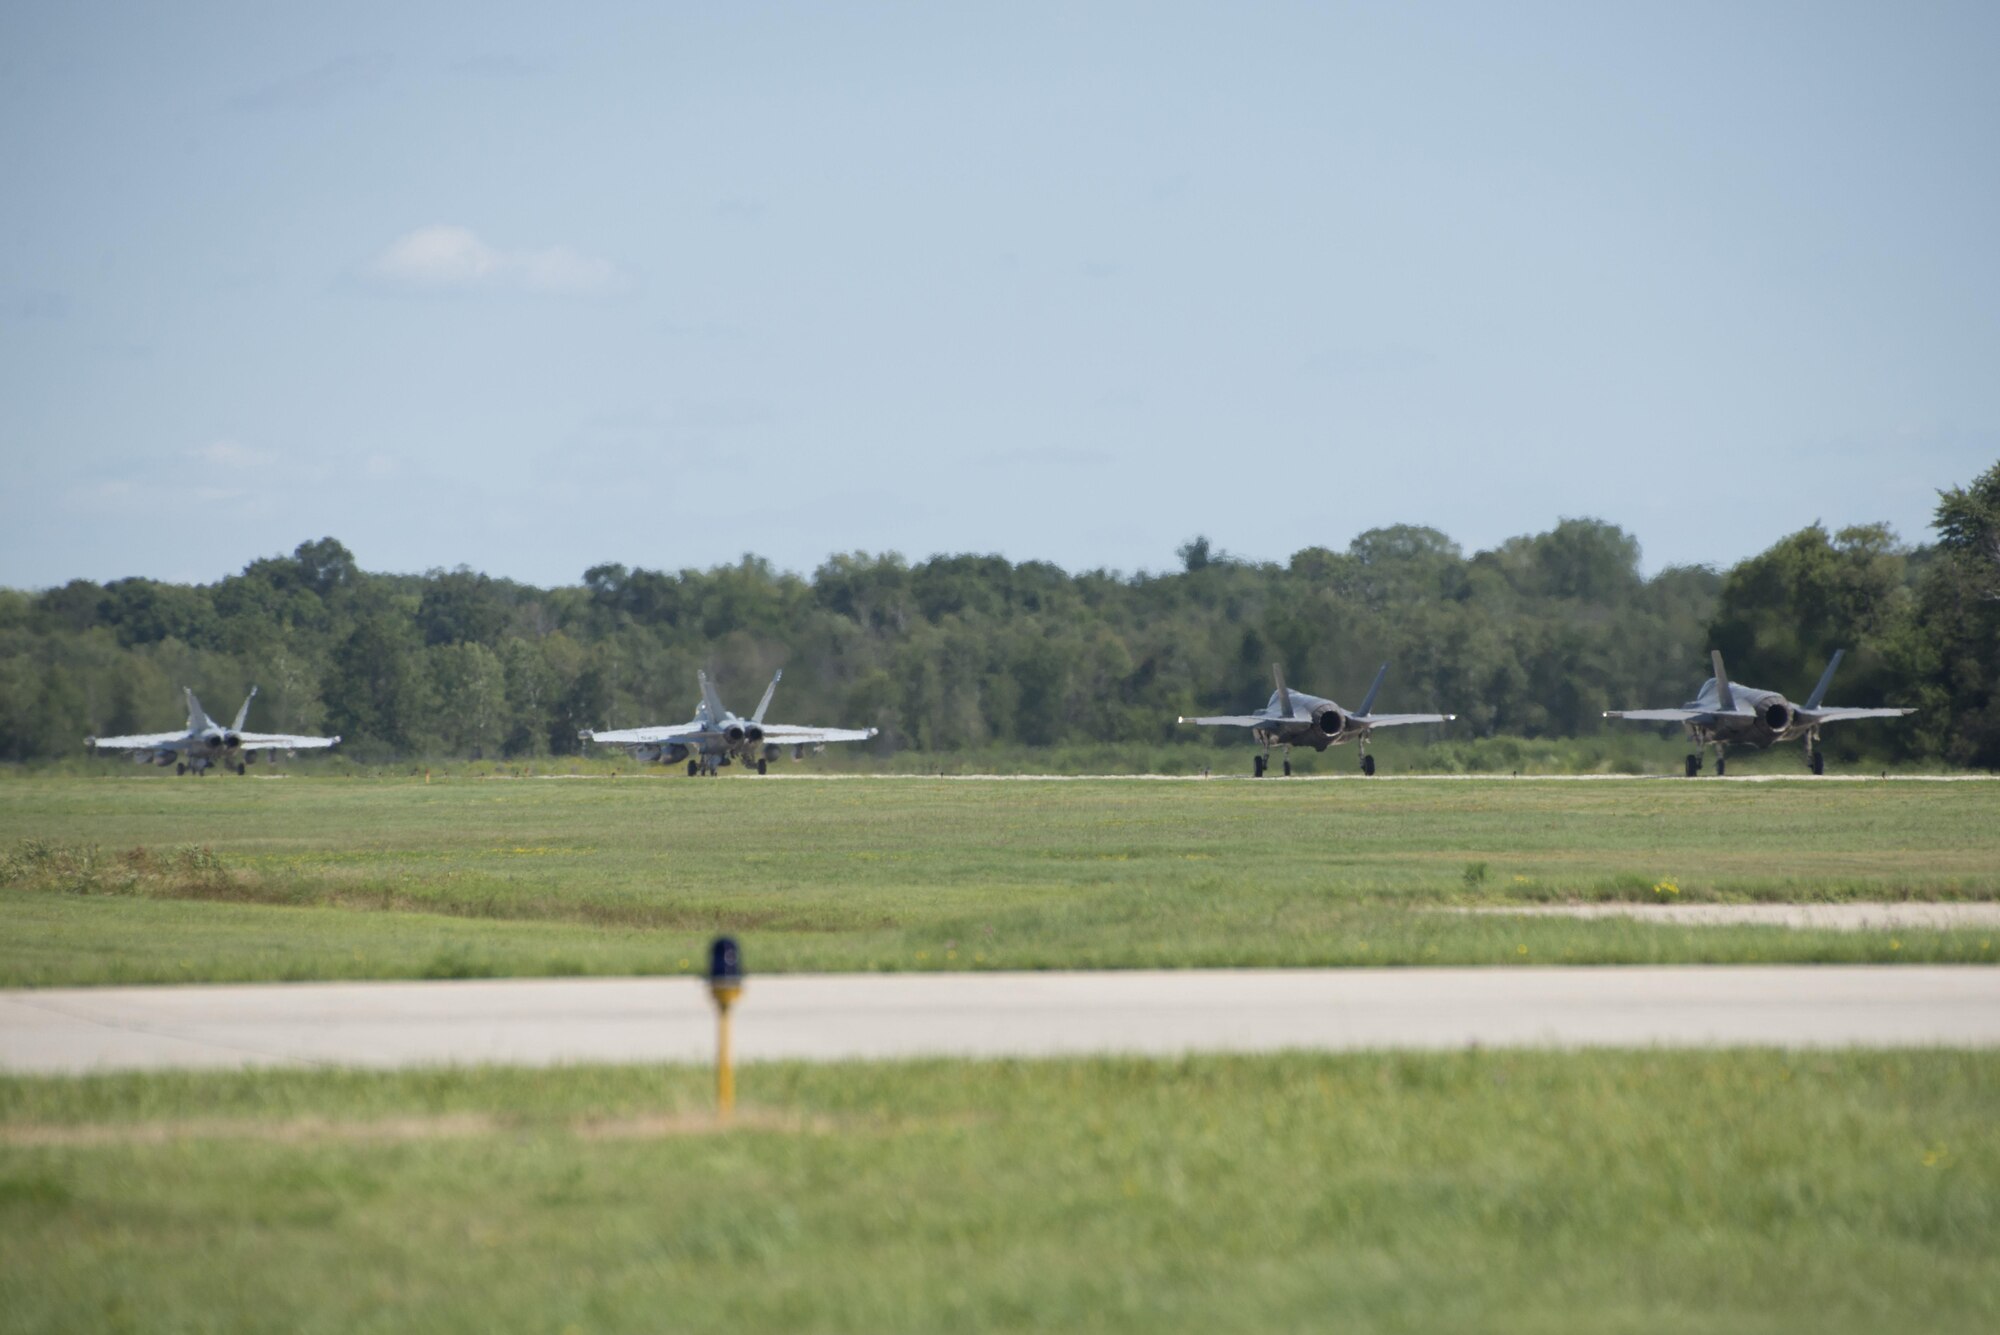 132nd Electronic Attack Squadron EA-18 Growlers and 33rd Fighter Wing F-35As taxi down the flightline during Northern Lightning Aug. 22, 2016, at Volk Field, Wis. Northern Lightning is a tactical-level, joint training exercise that emphasizes fifth and fourth generation assets engaged in a contested, degraded environment. (U.S. Air Force photo by Senior Airman Stormy Archer)